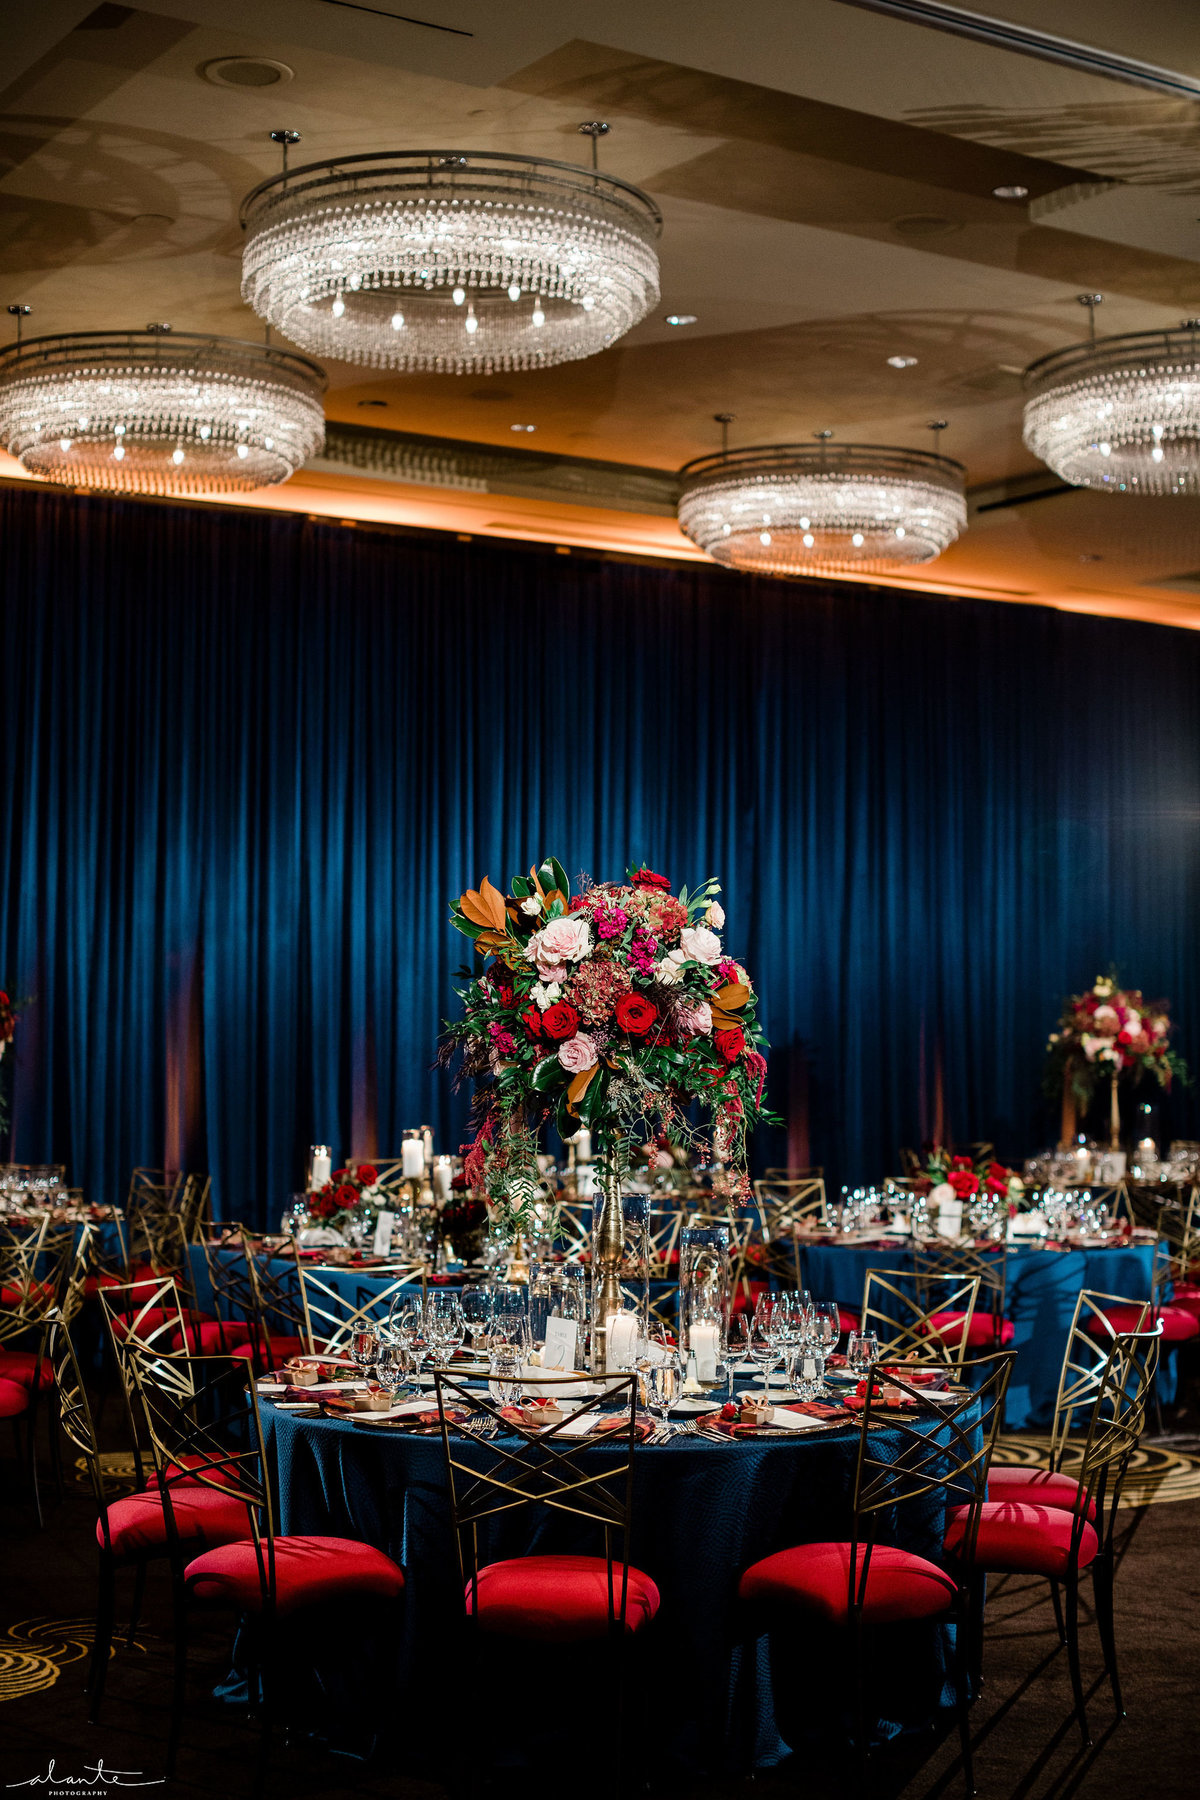 Four Seasons ballroom wedding with navy blue wall draping, blue linens, and Chameleon chairs with  deep red chair cushions